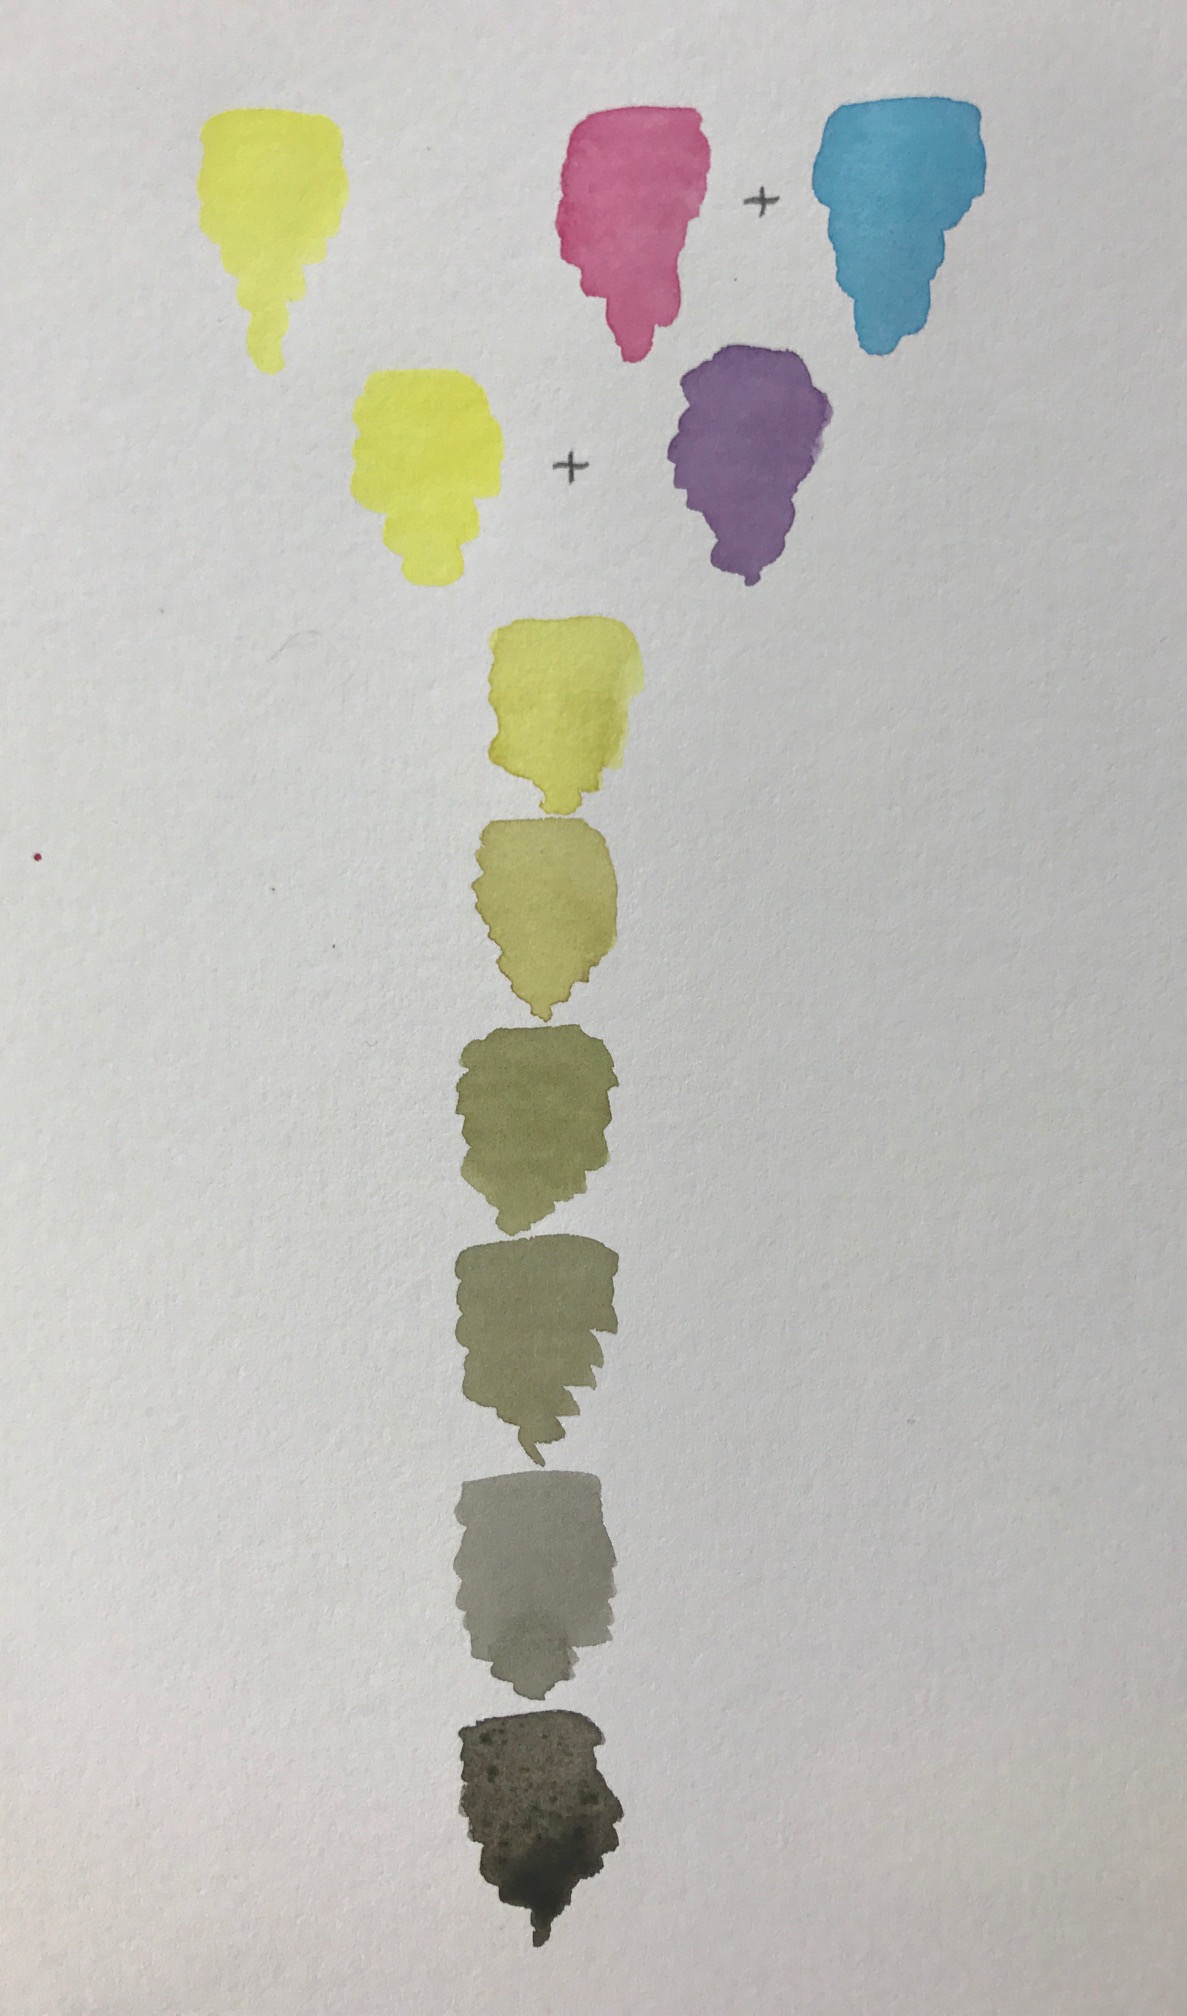 Mixing Neutrals With Yellow and Purple